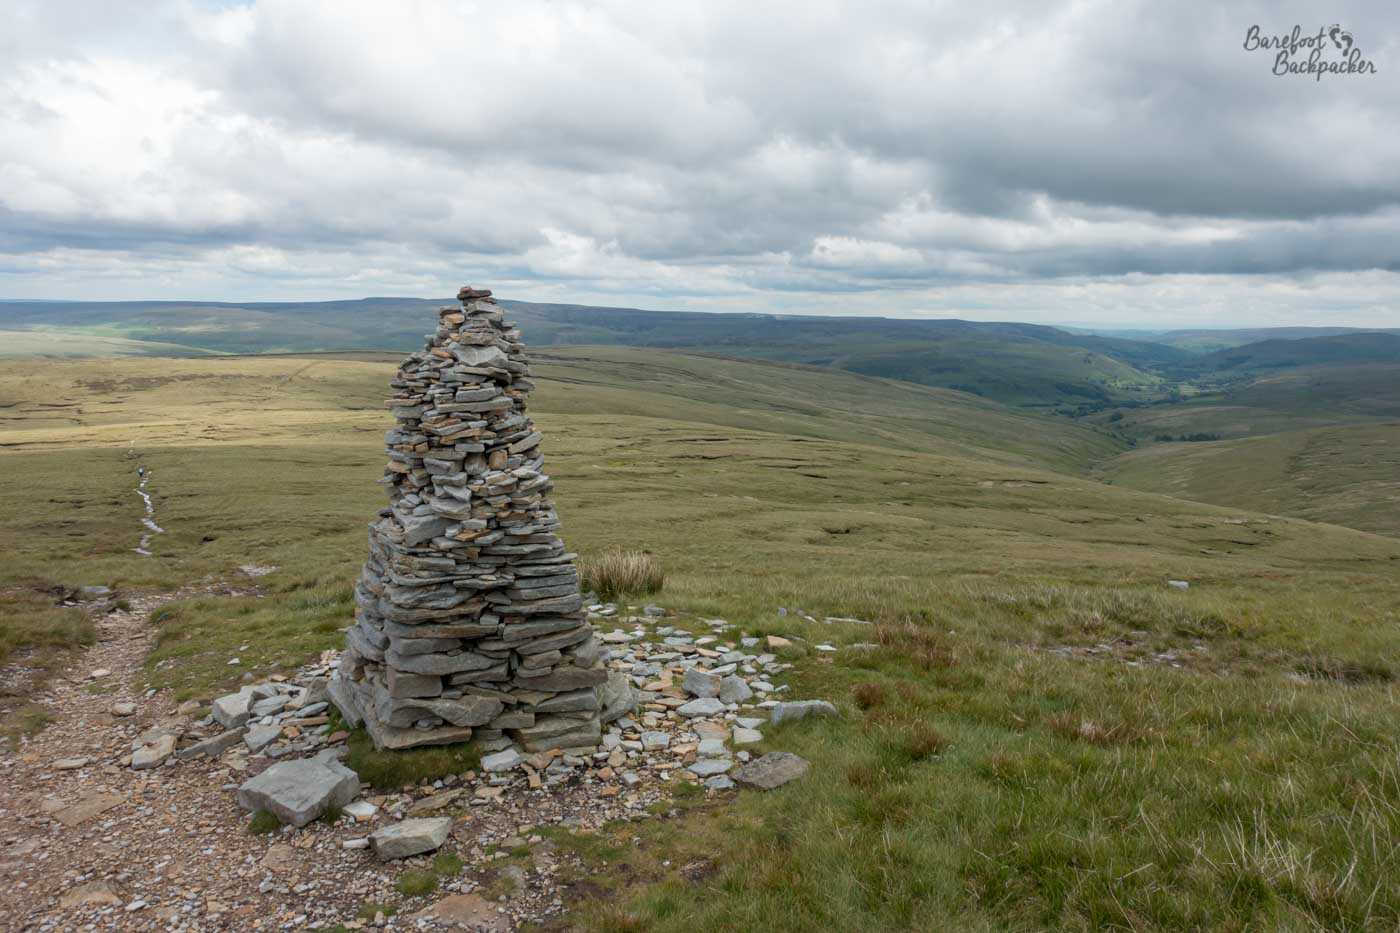 A cairn – a pile of small pebbles/stones made into a small tower. It's on top of a hill. A path descends to the right of shot. On the left the hill rolls downwards steeply and the view is replaced by several other similar hills covered in low-level of grass. The sky is light but full of cloud.